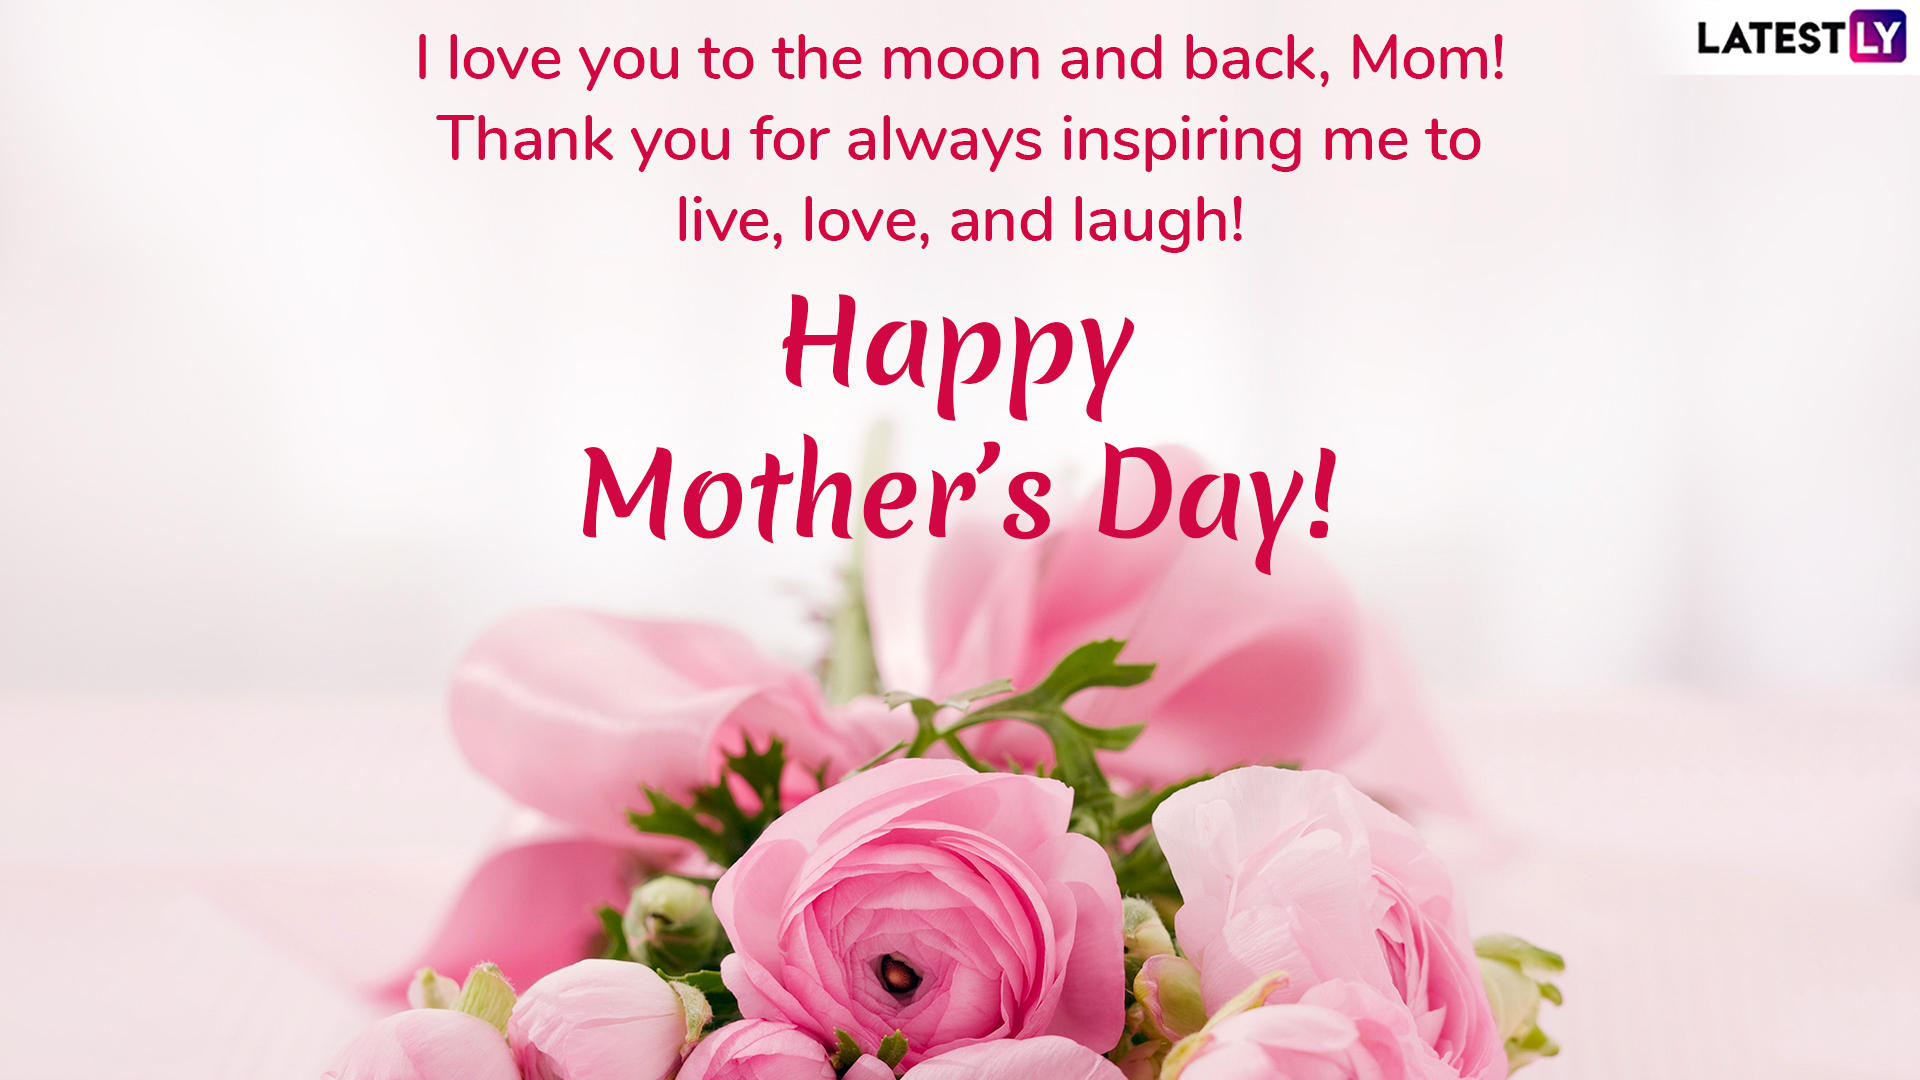 Happy Mother’s Day 2019 Greeting Cards: Send These Wishes, Quotes ...